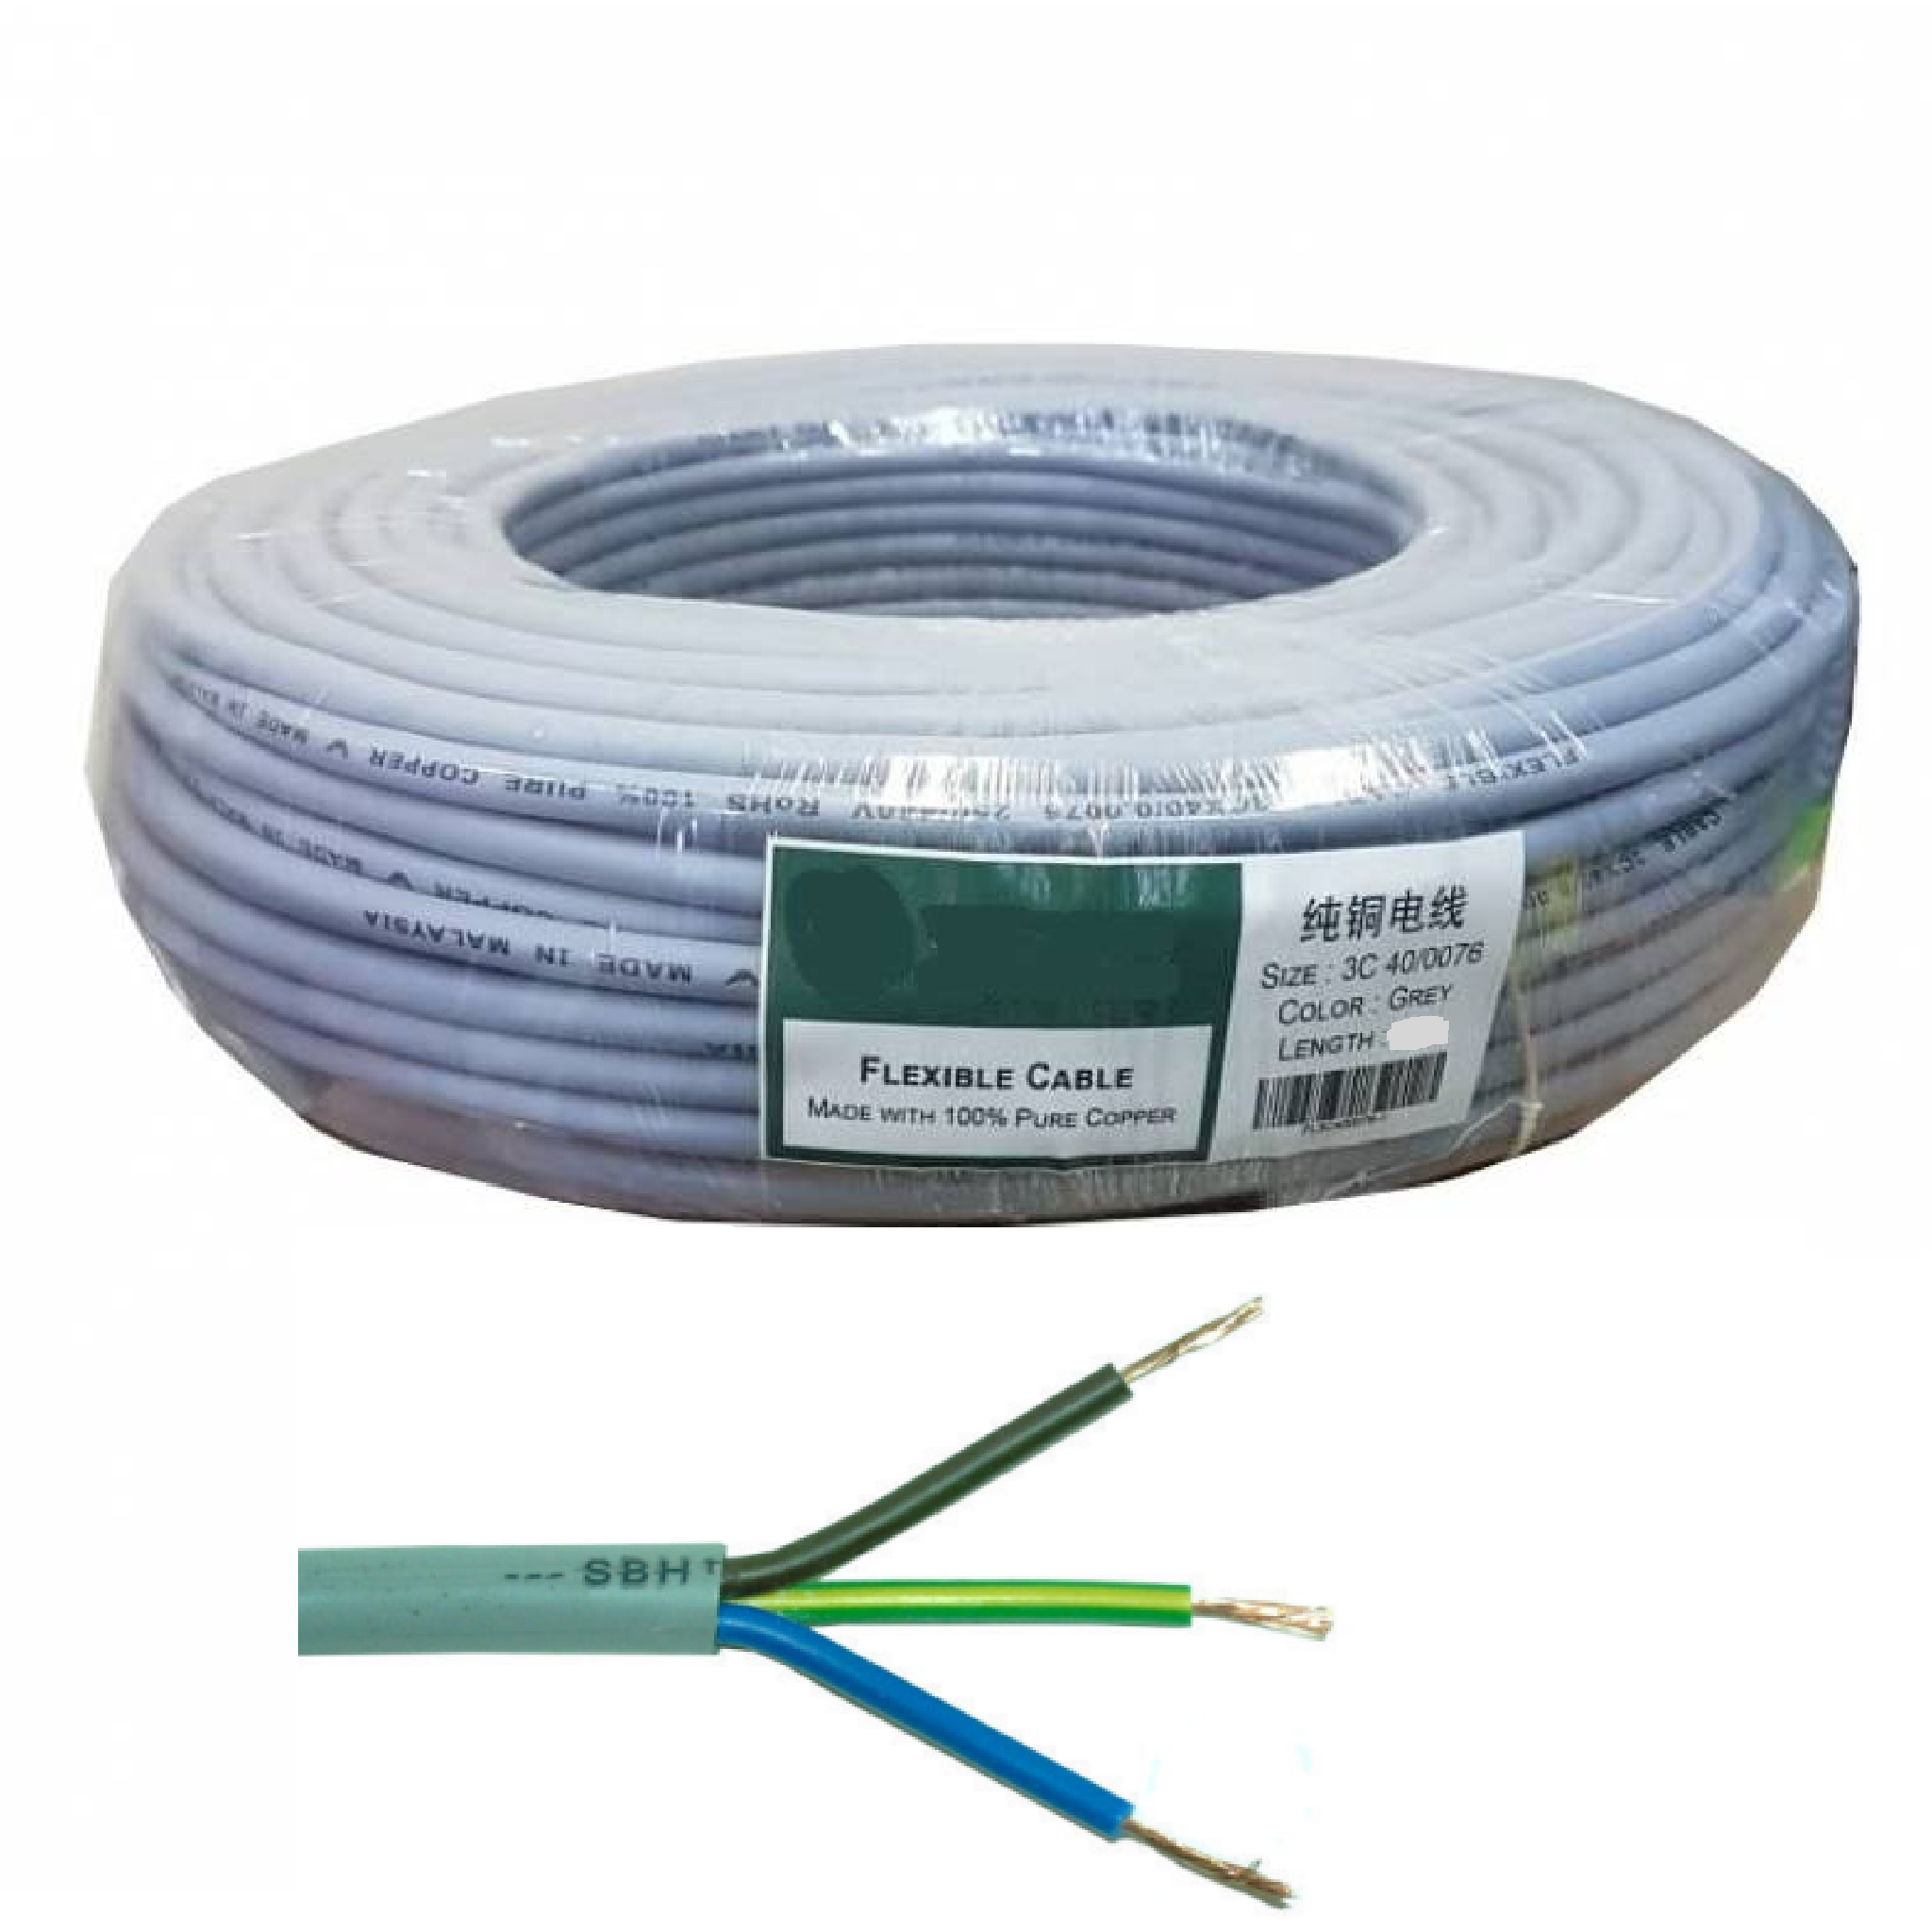 CAVICO 3 CORE 3C X 110/0076 Electrical Cable 35M ROLL GREY